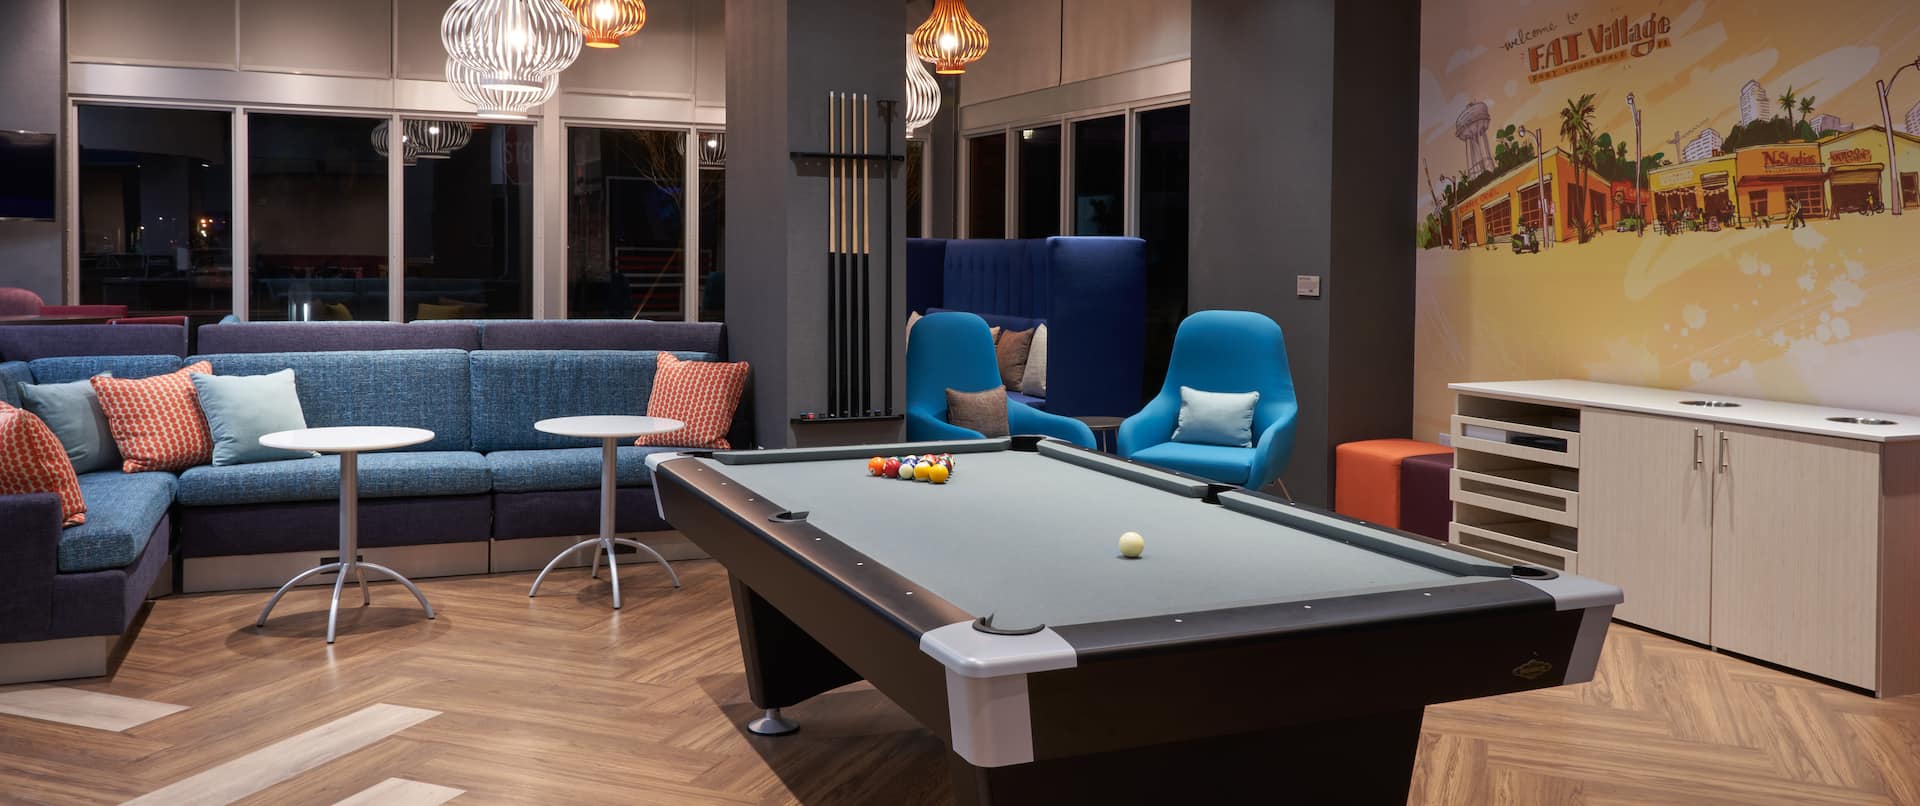 lobby seating area and pool table